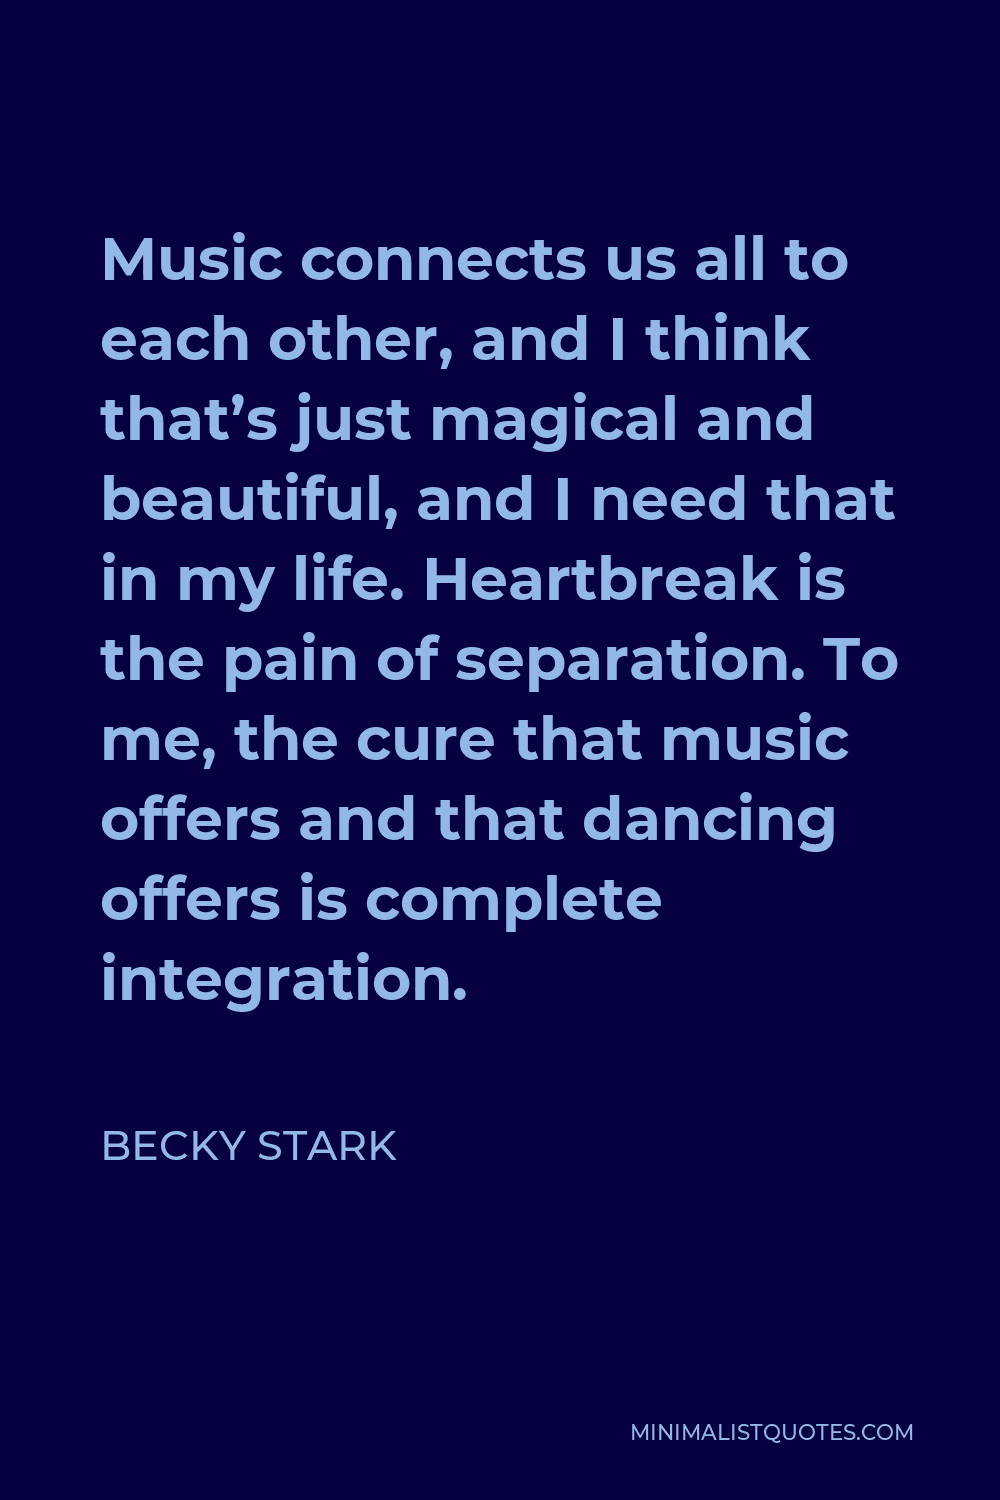 Becky Stark Quote - Music connects us all to each other, and I think that’s just magical and beautiful, and I need that in my life. Heartbreak is the pain of separation. To me, the cure that music offers and that dancing offers is complete integration.